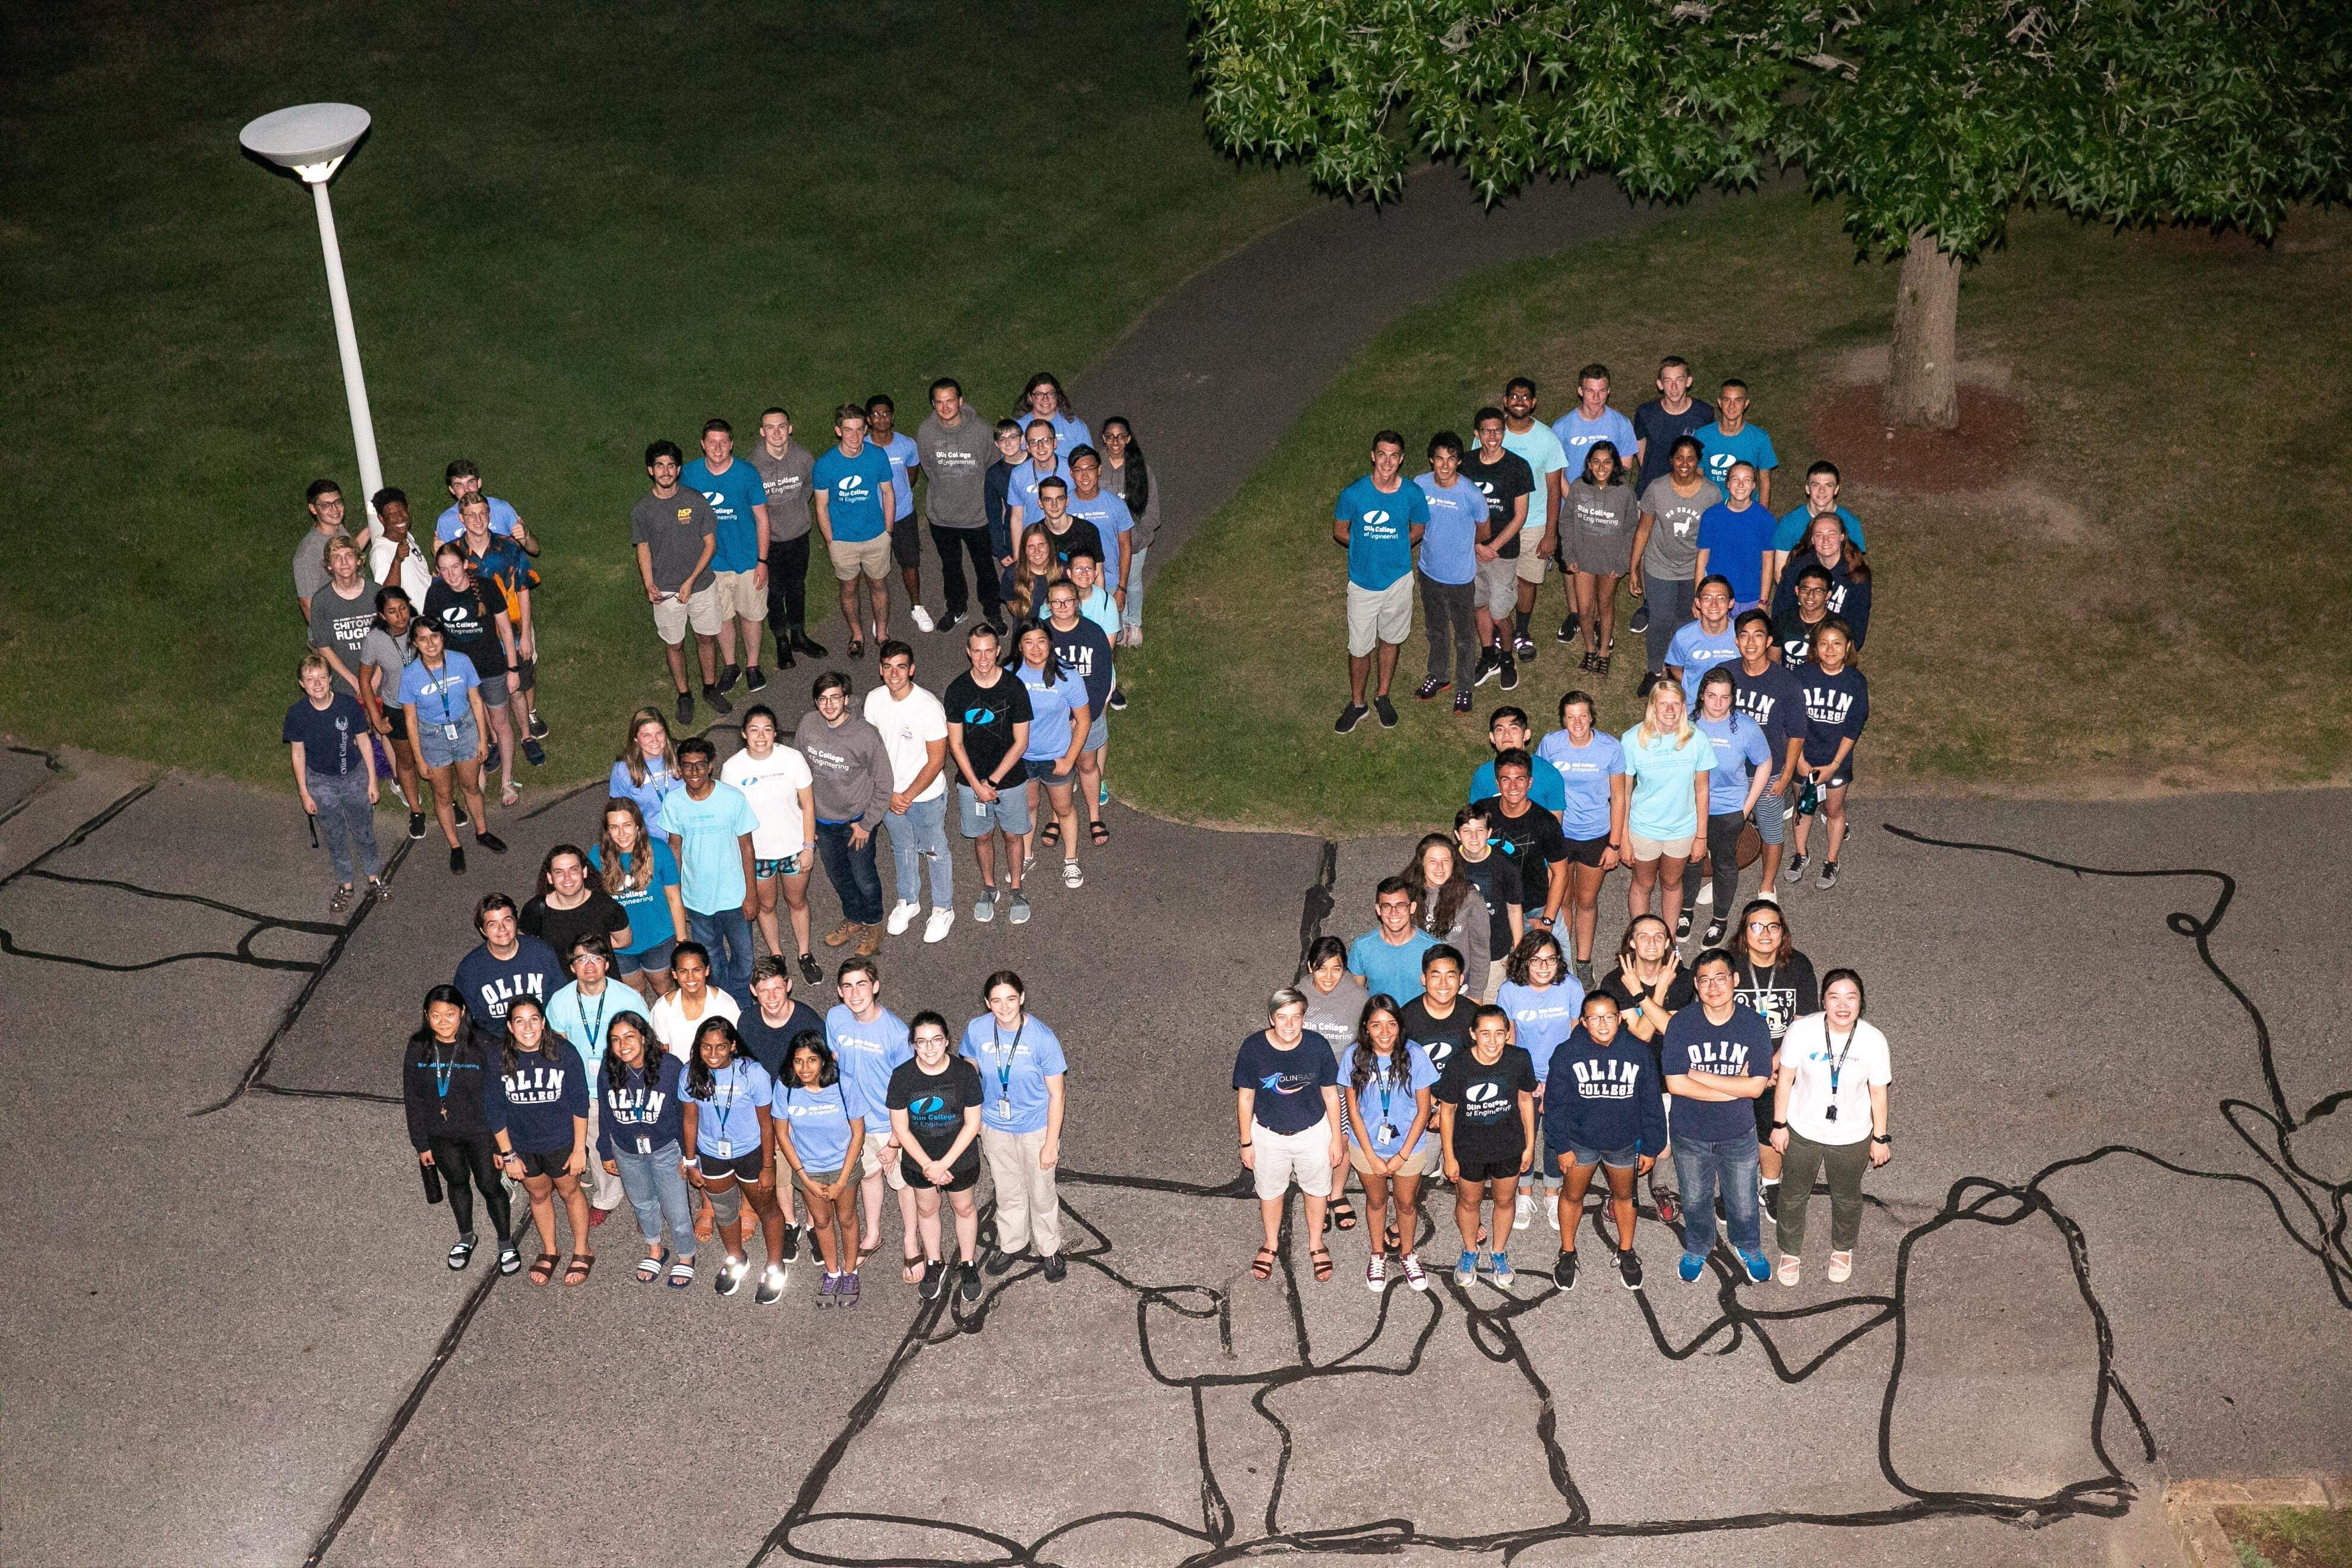 Aerial shot of students wearing Olin shirts forming "22" to indicate their graduating year.